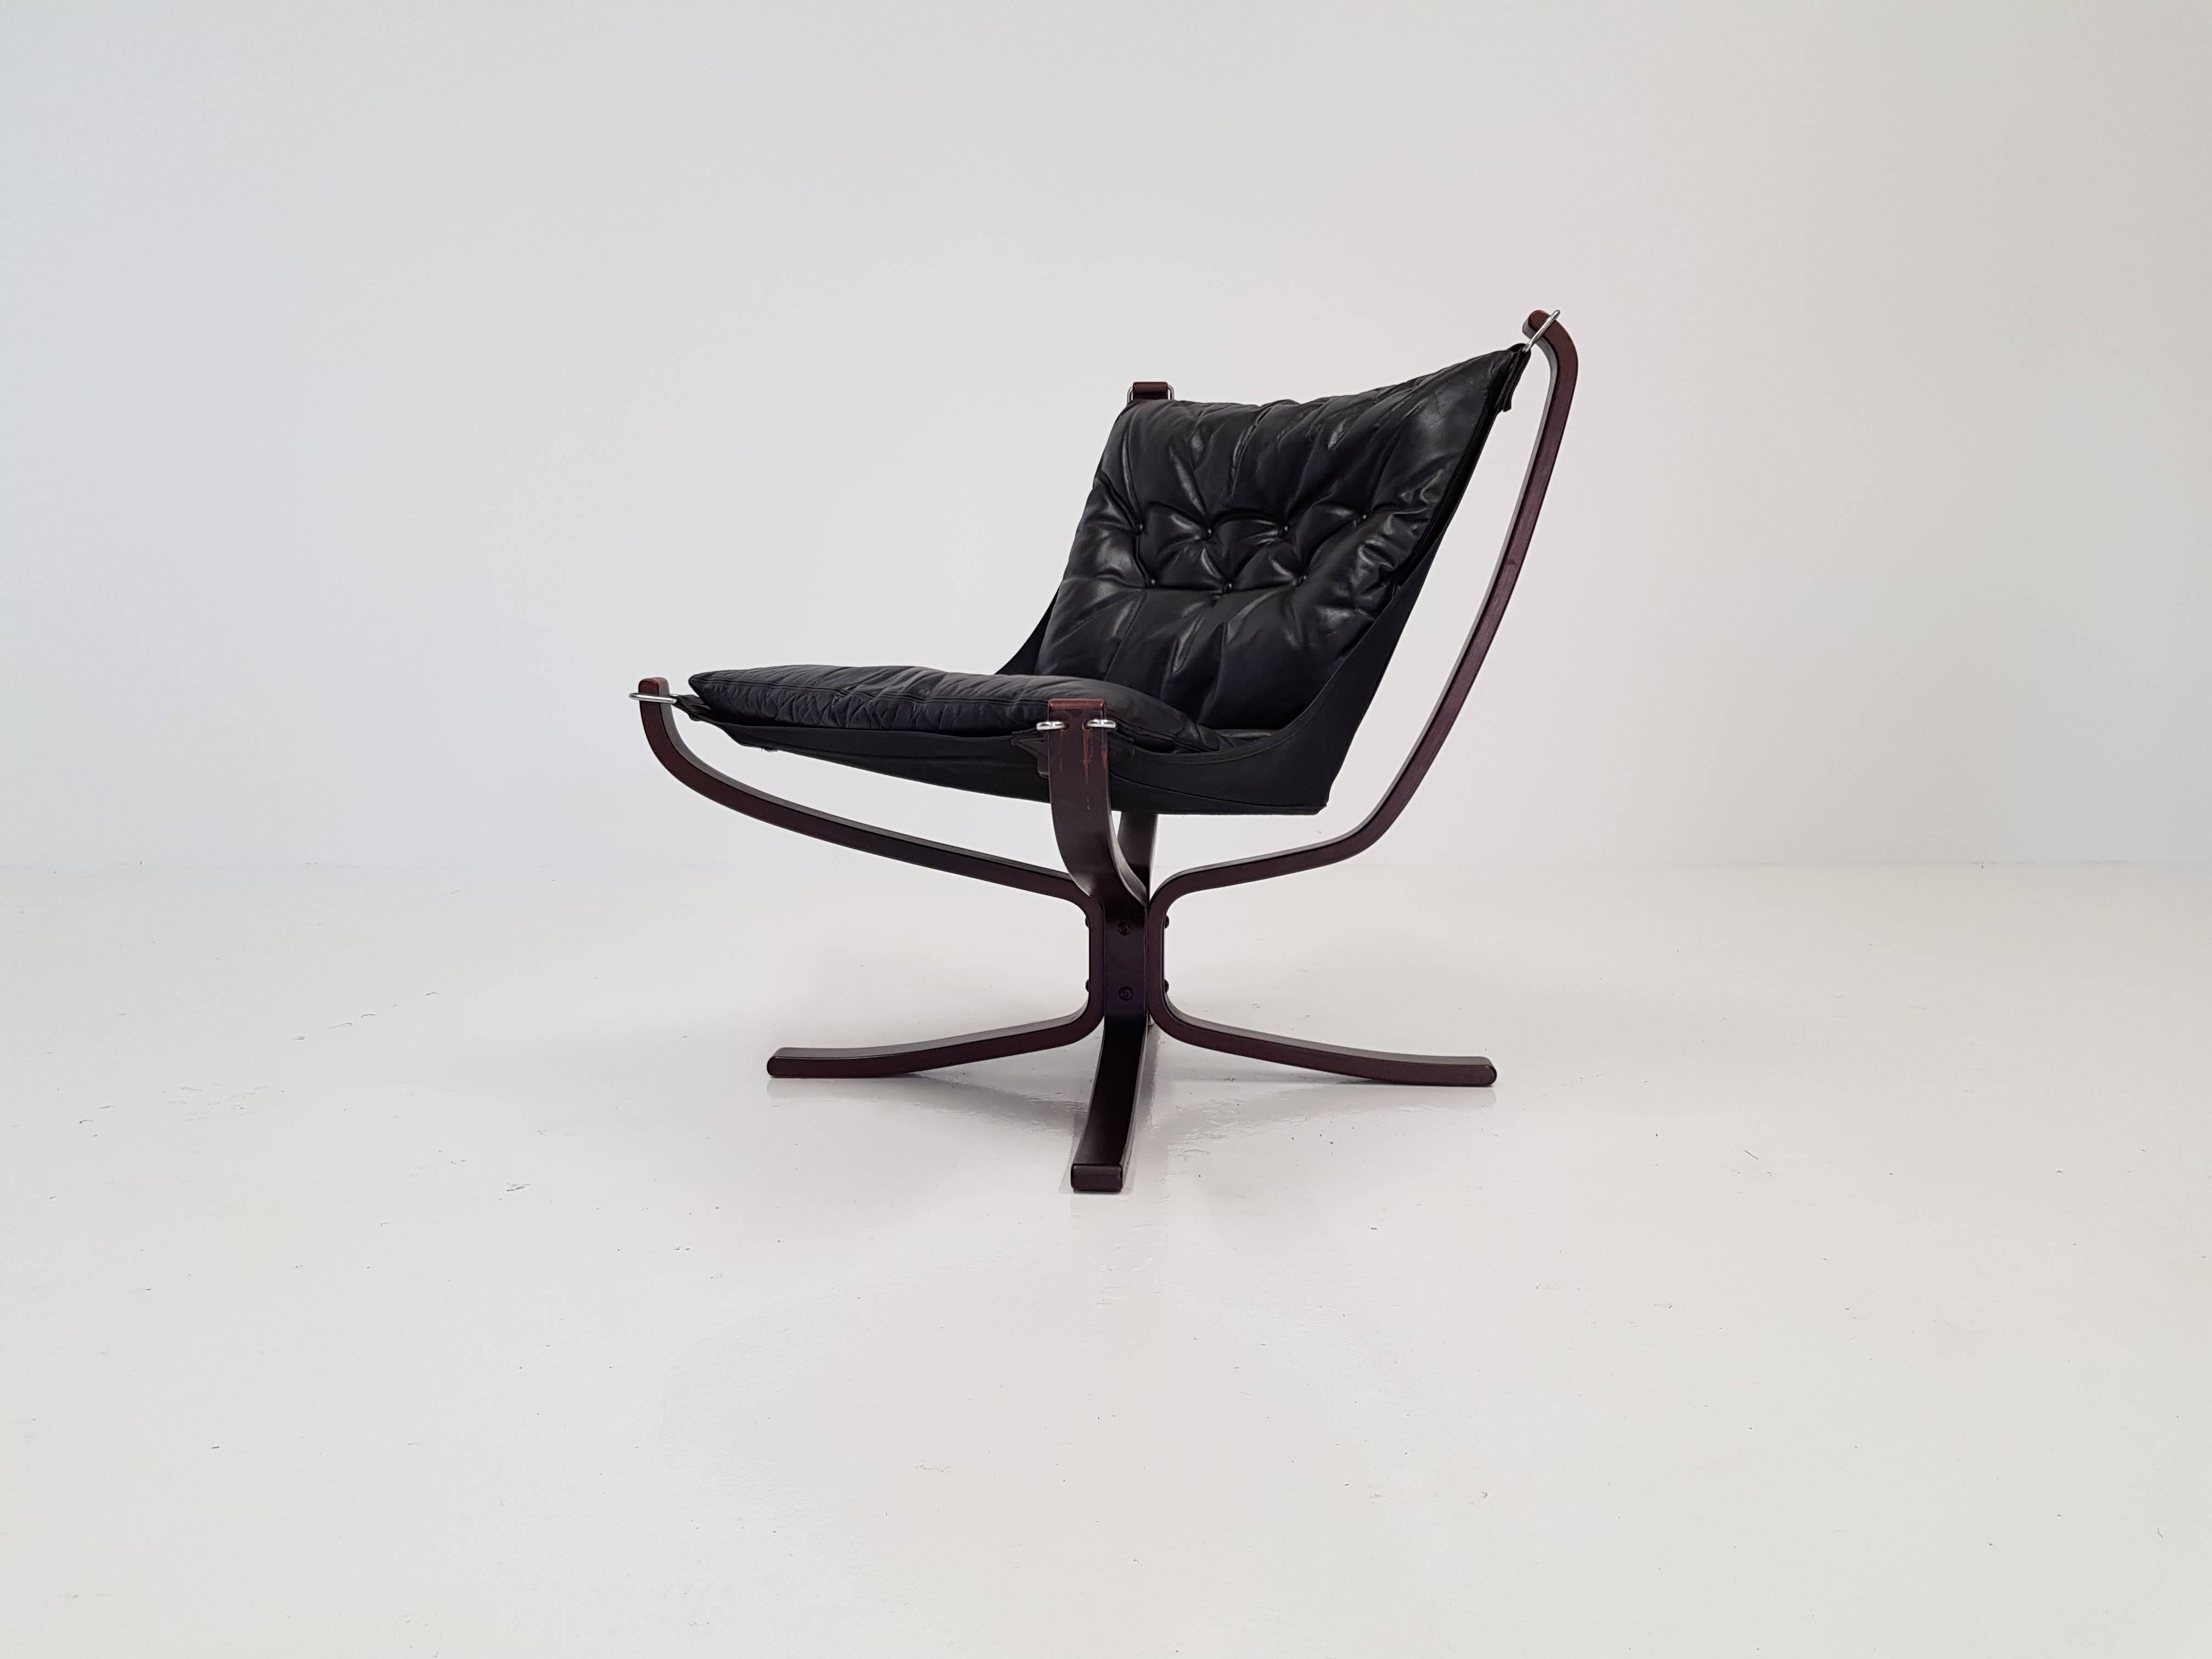 Vintage low-backed X-framed Sigurd Ressell designed Falcon chair, 1970s.

A super comfortable, amazing looking 1970s Sigurd Resell designed iconic Falcon chair. X framed with hammock design. Produced by Vatne Mobler, Norway.


